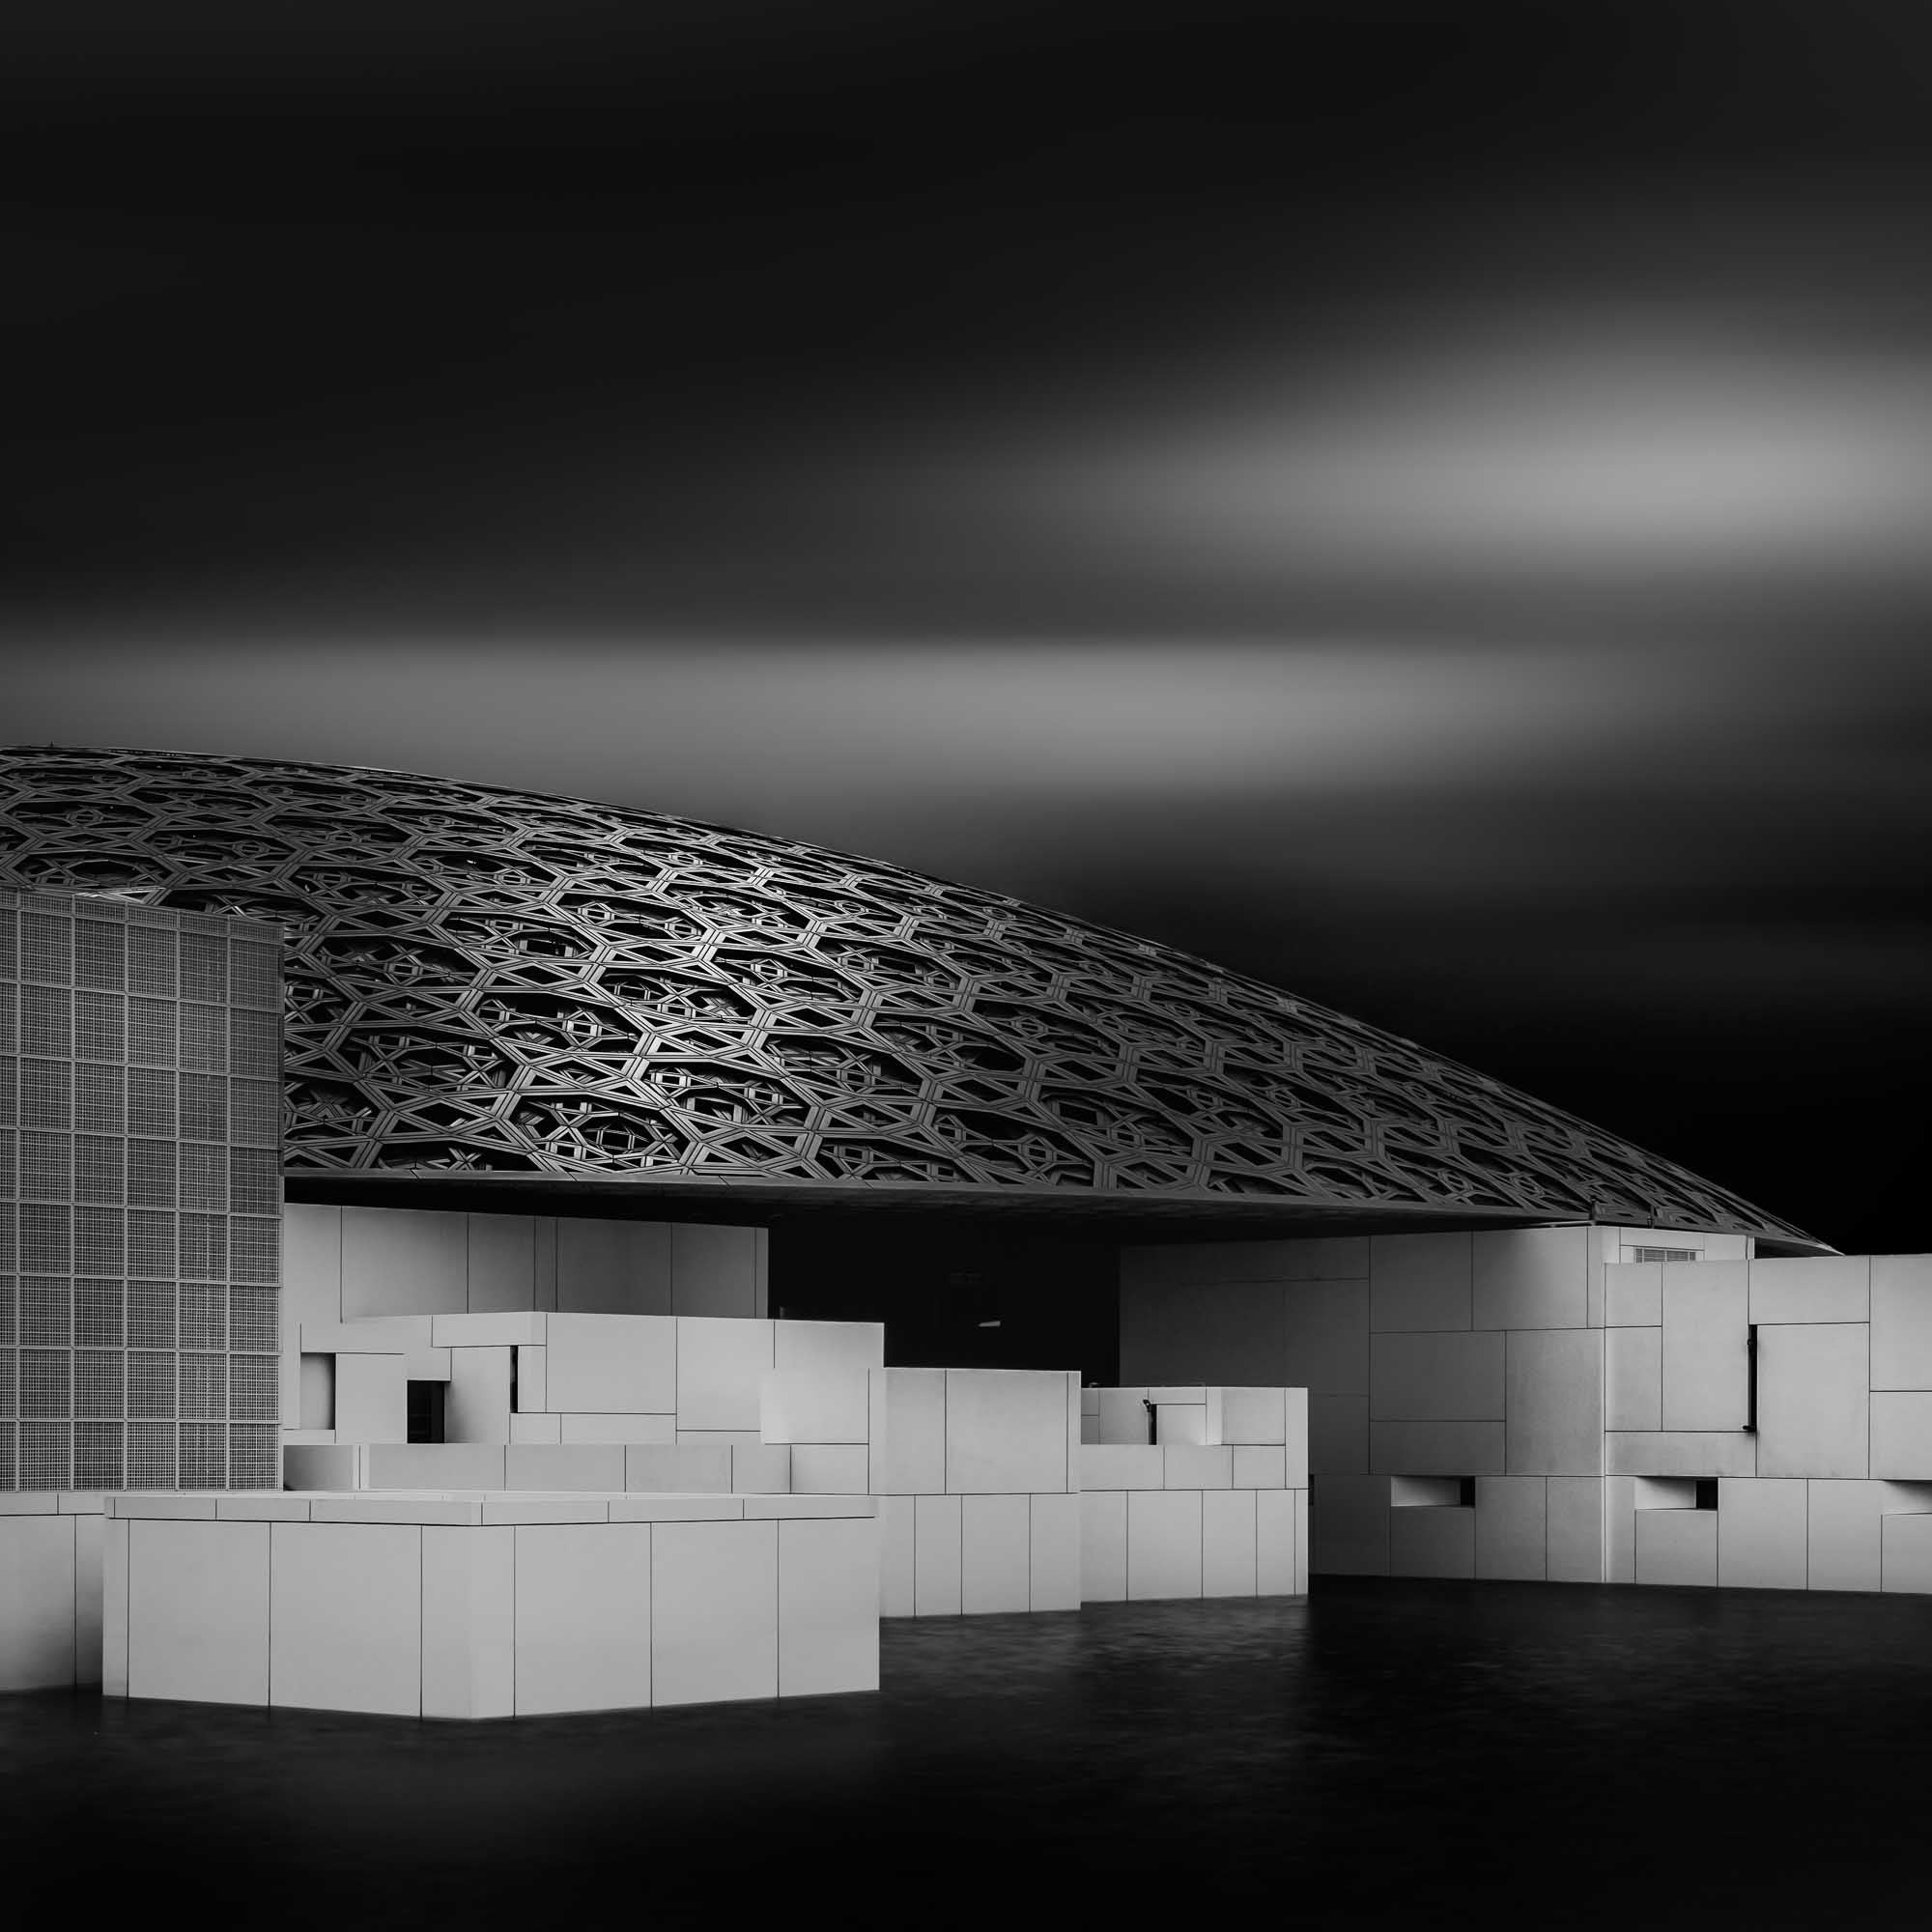 Black and white photo of the Louvre Abu Dhabi, highlighting the intricate geometric patterns of the dome against a dramatic sky.